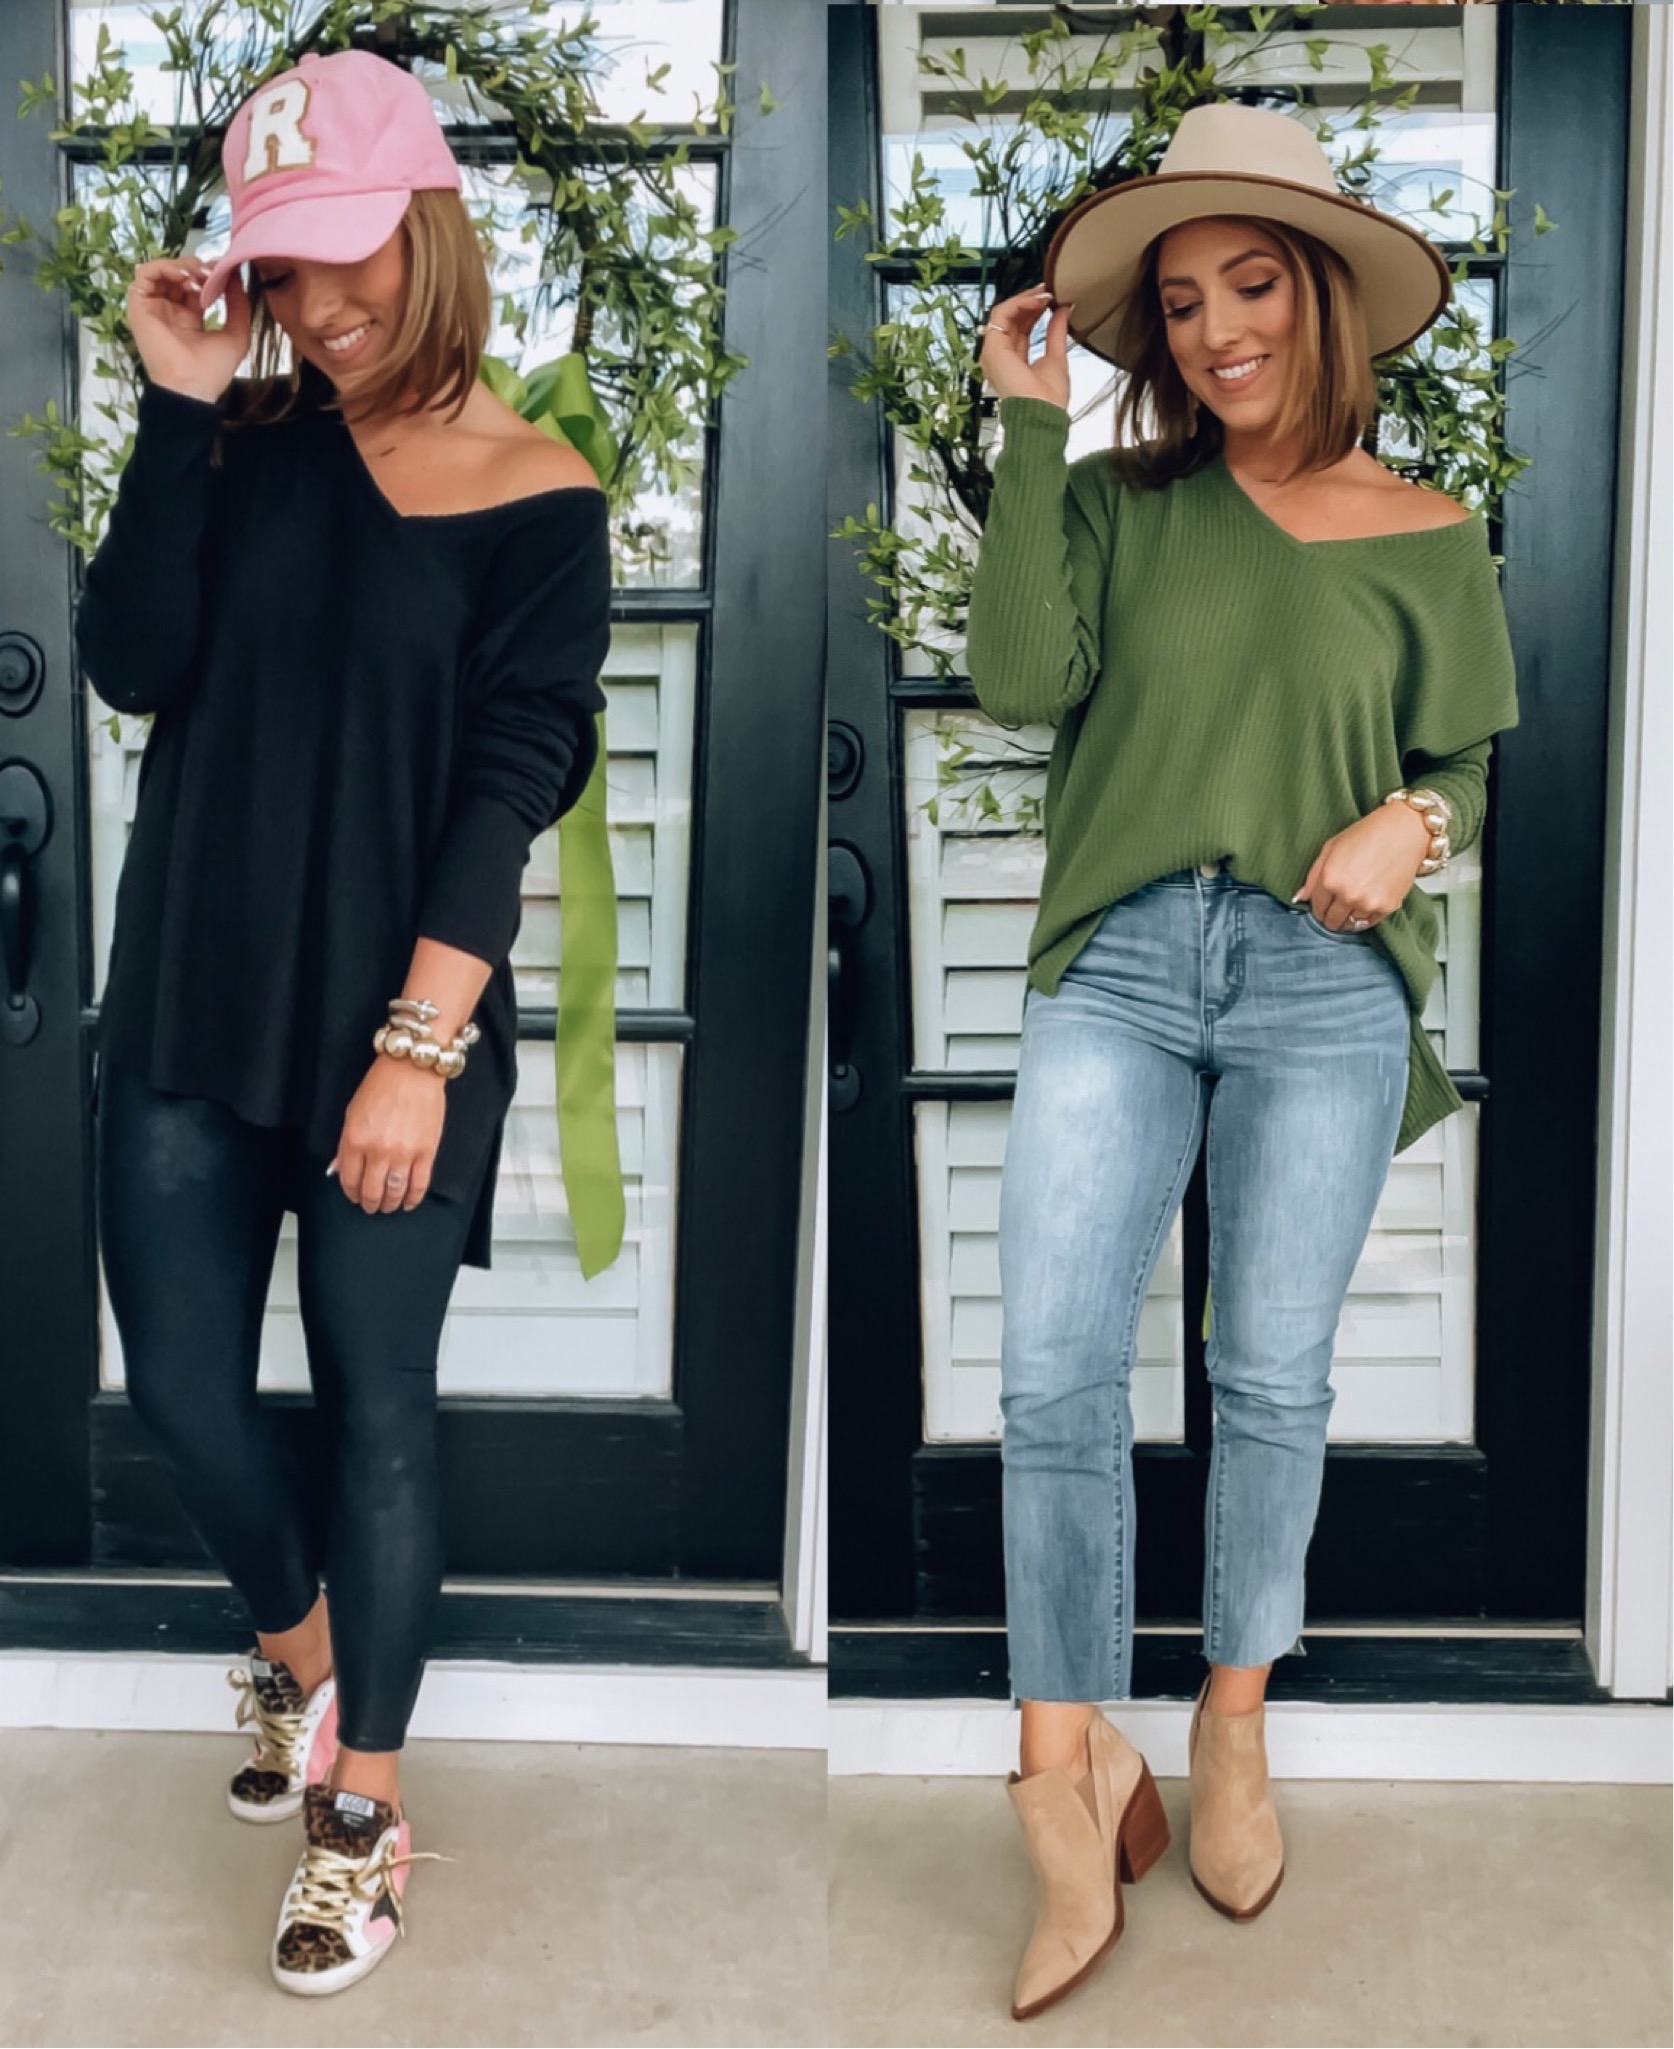 Walmart New Fall Arrivals - Something Delightful Blog #WalmartFashion #WalmartNewArrivals #WalmartFallFinds #AffordableFashion #Fall2022Trends